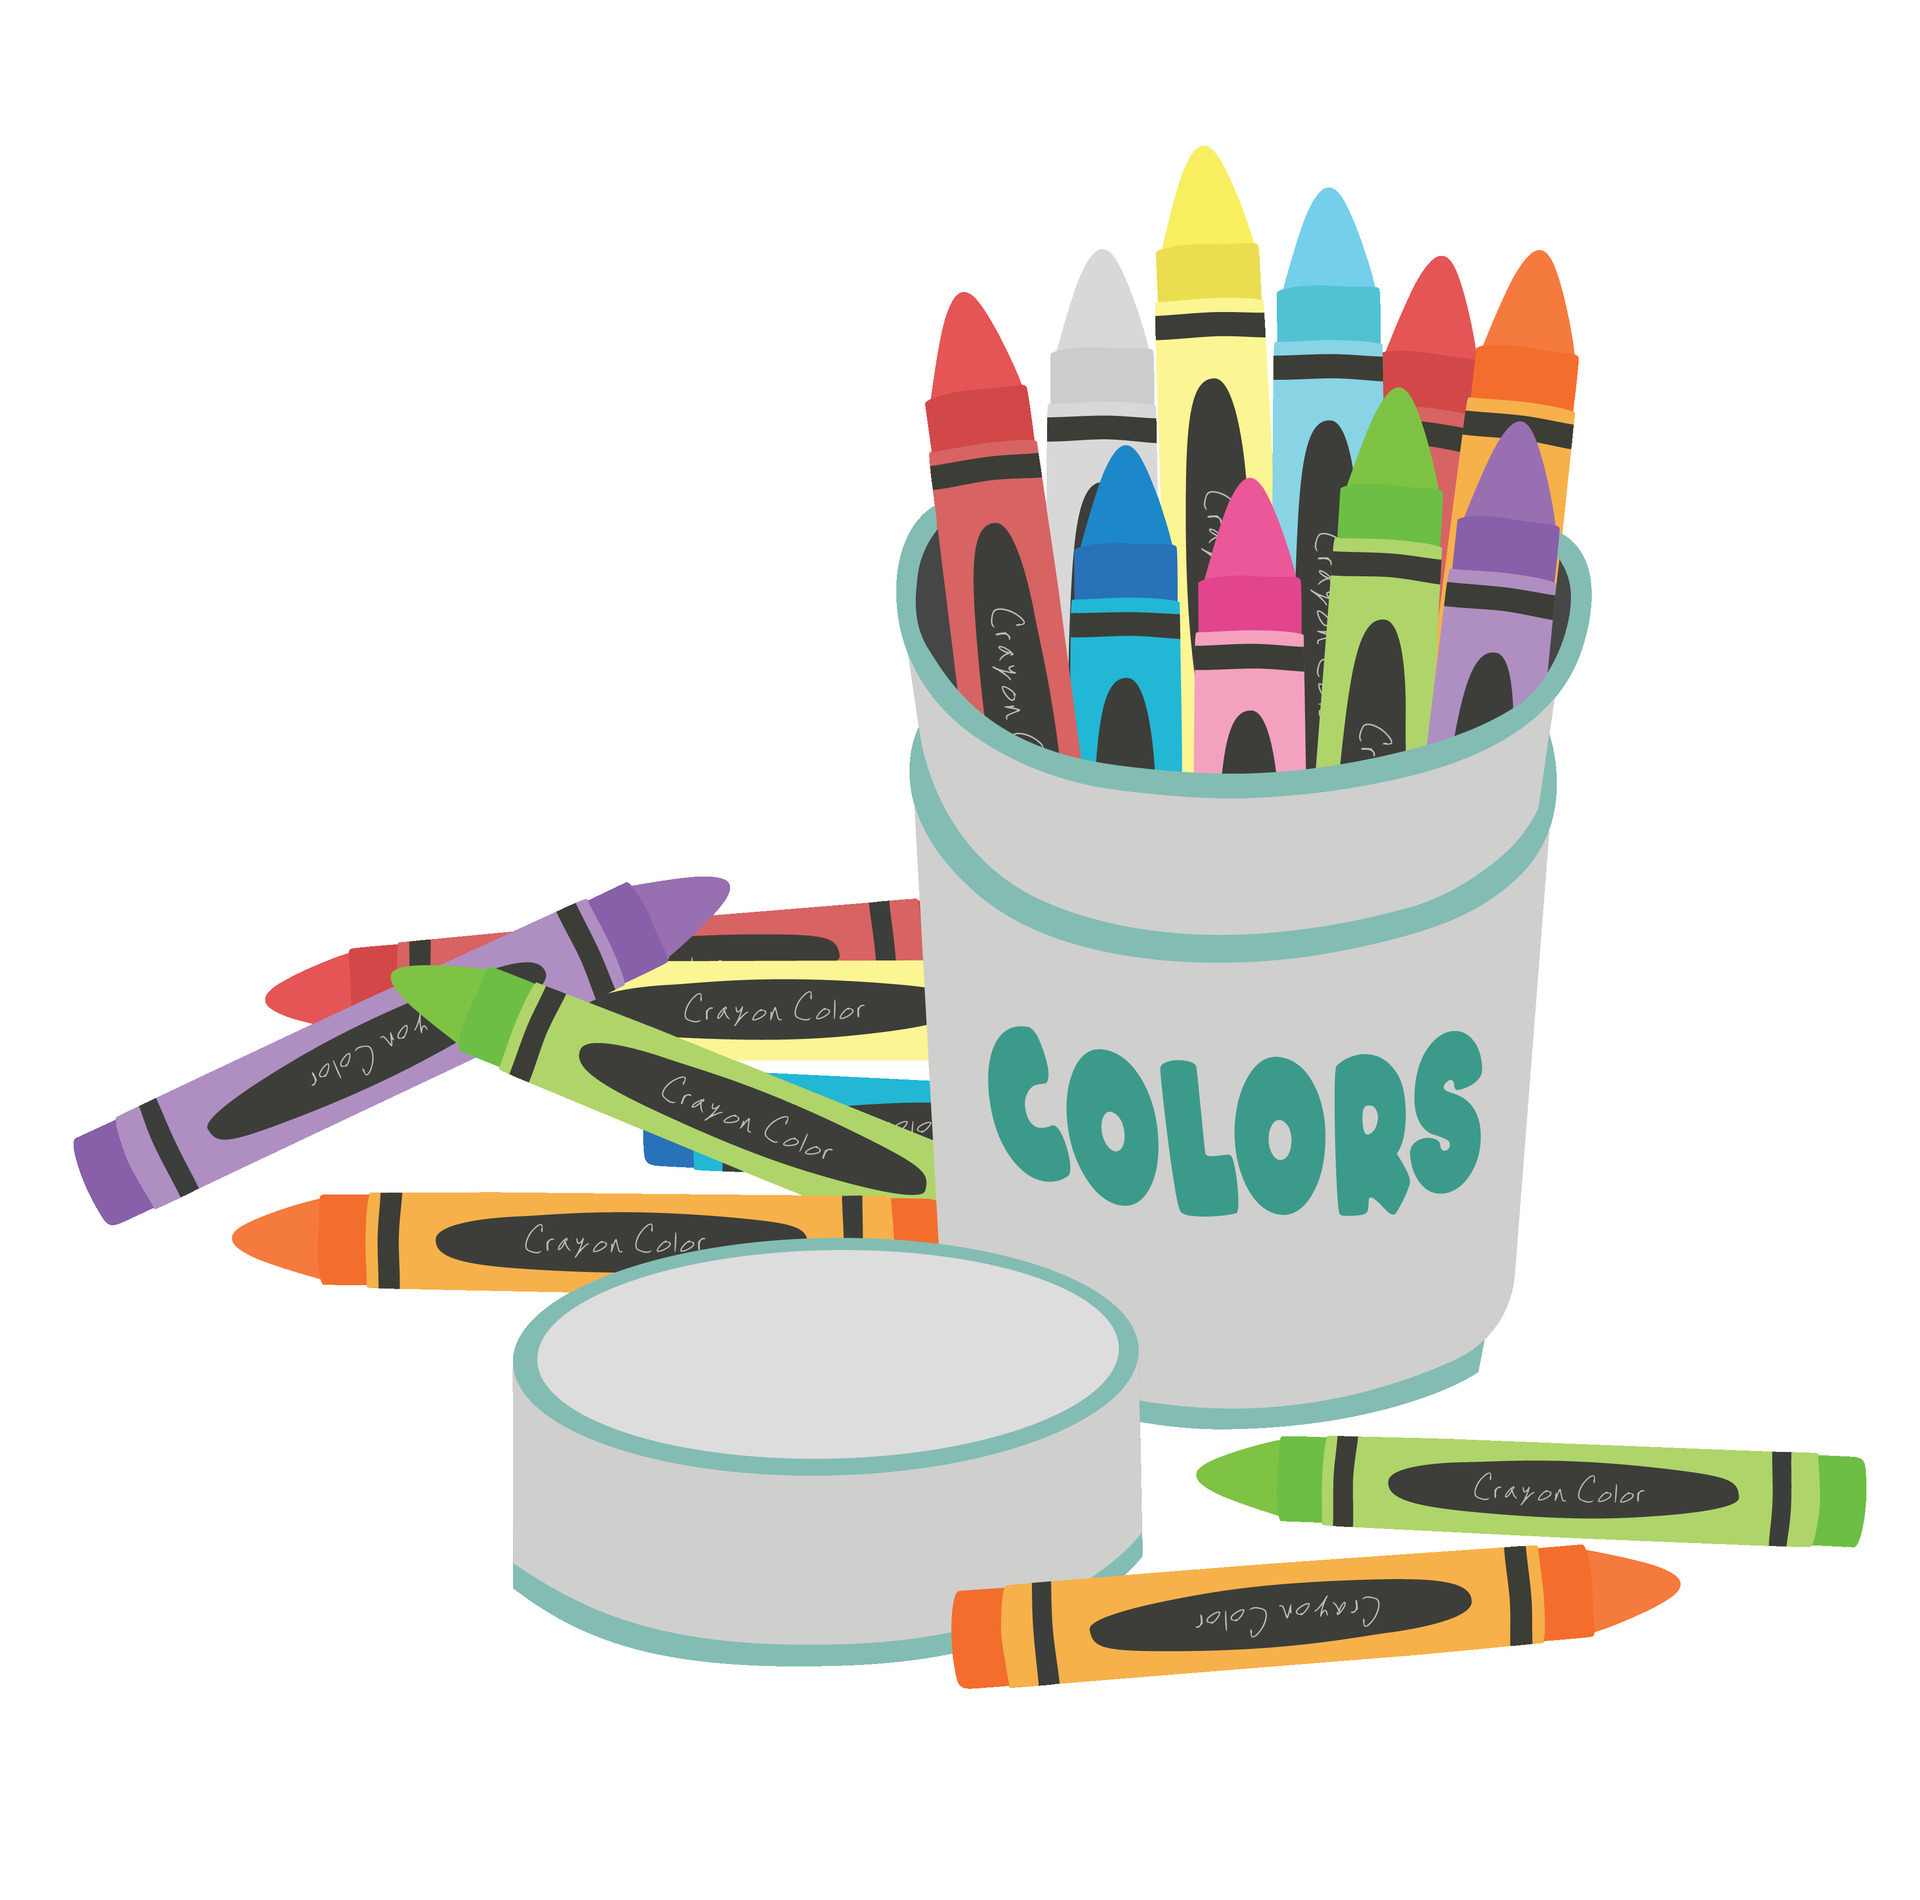 Wax Crayons Line And Solid Icon Back To School Concept Color